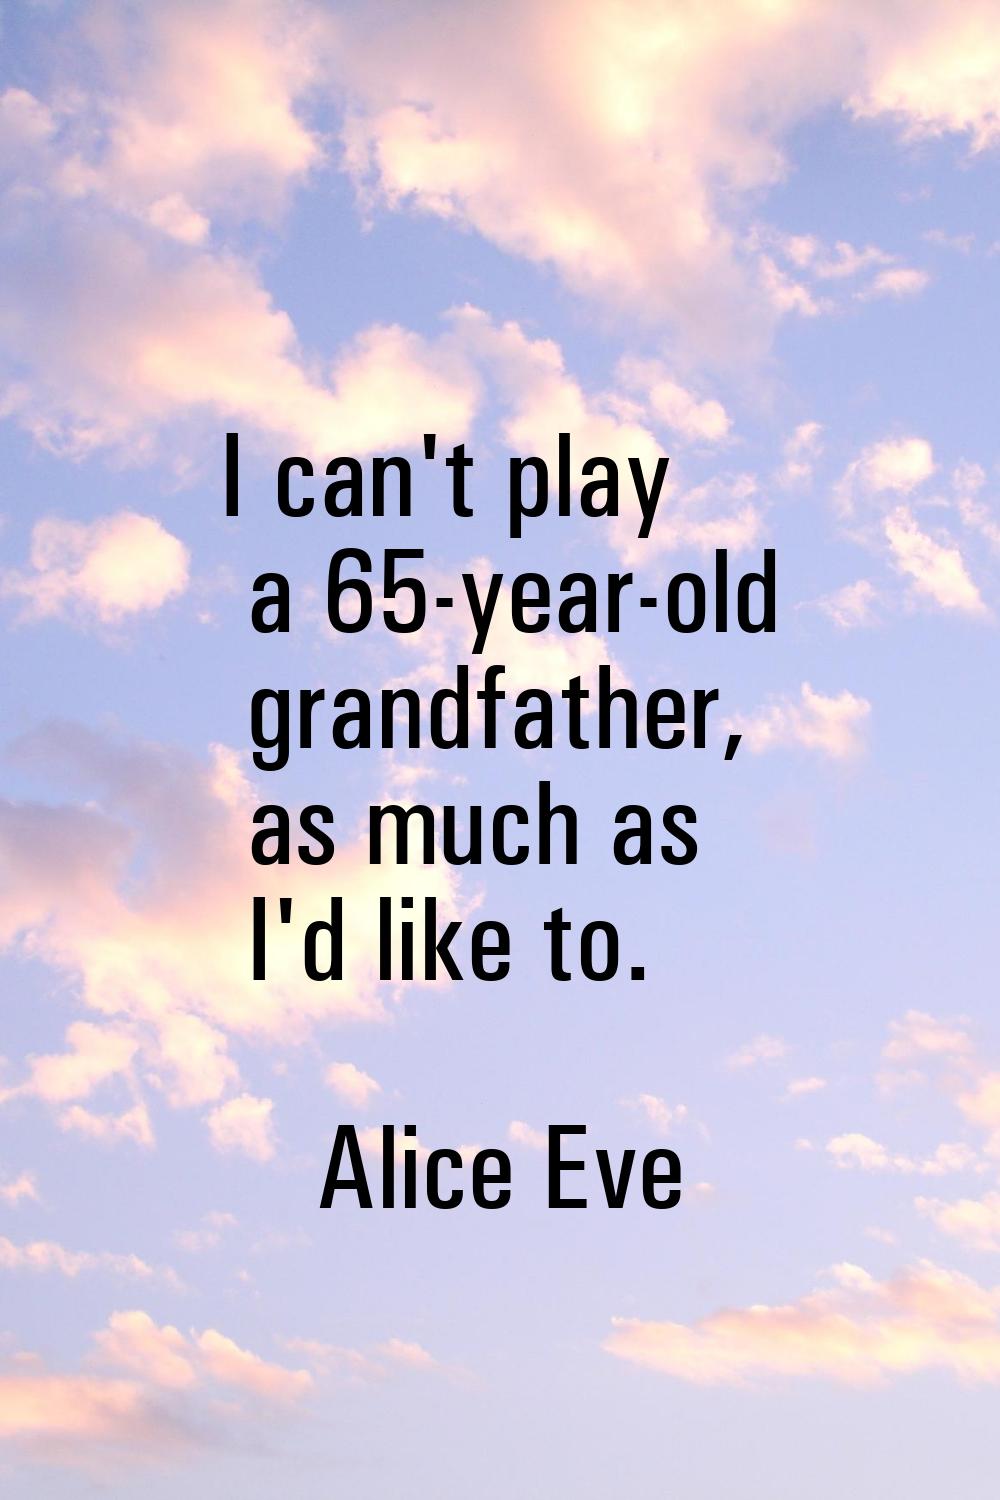 I can't play a 65-year-old grandfather, as much as I'd like to.